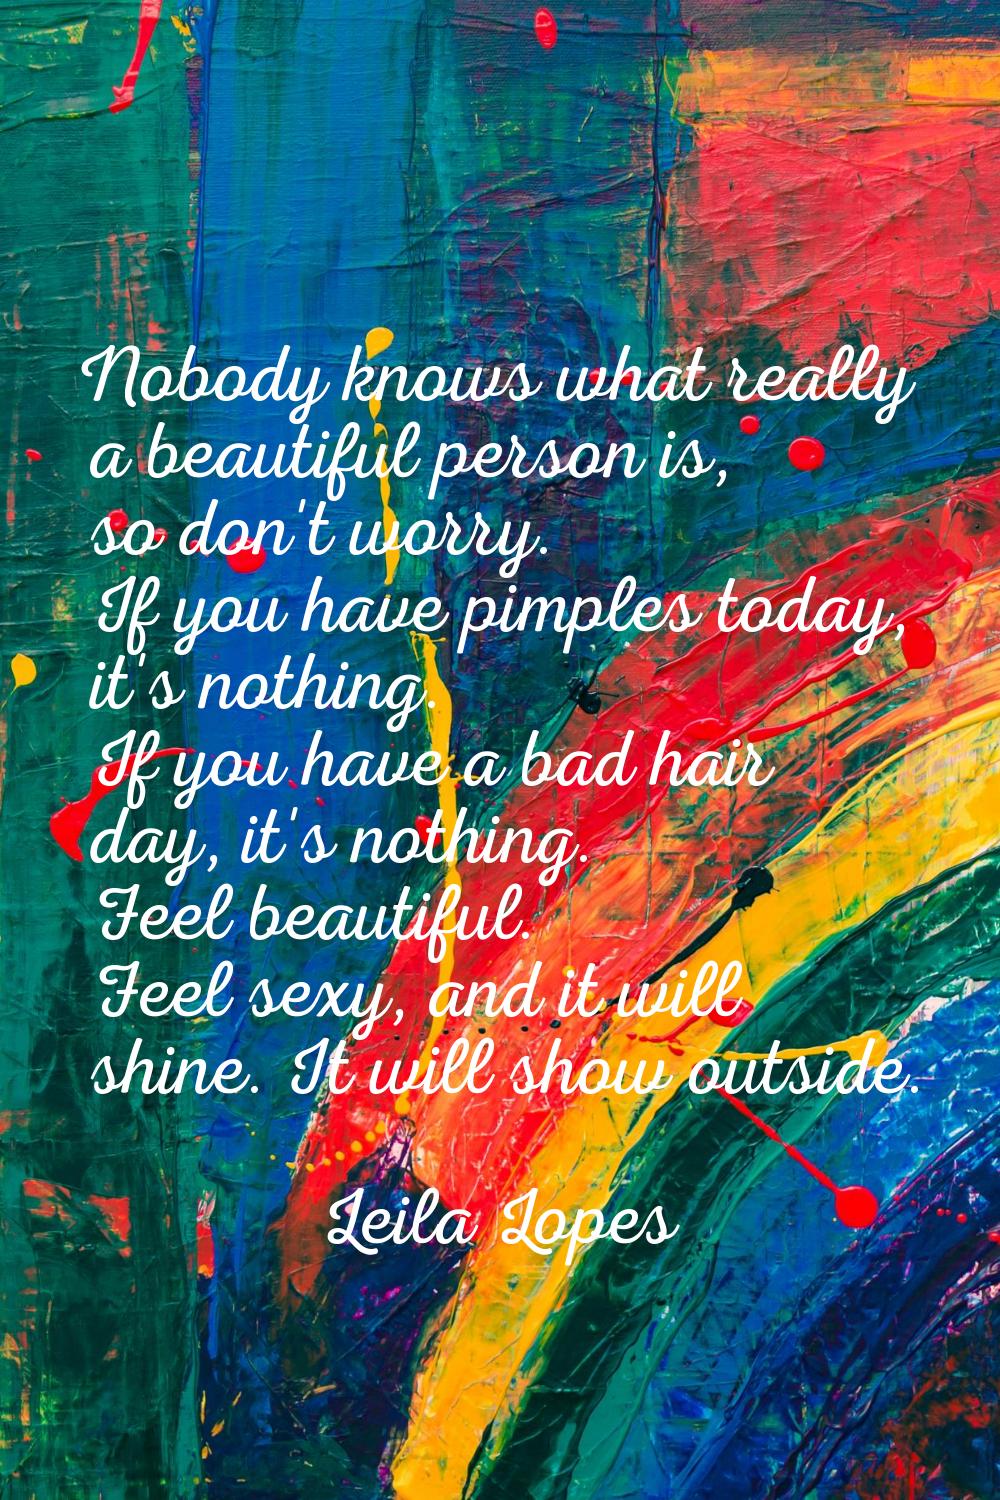 Nobody knows what really a beautiful person is, so don't worry. If you have pimples today, it's not